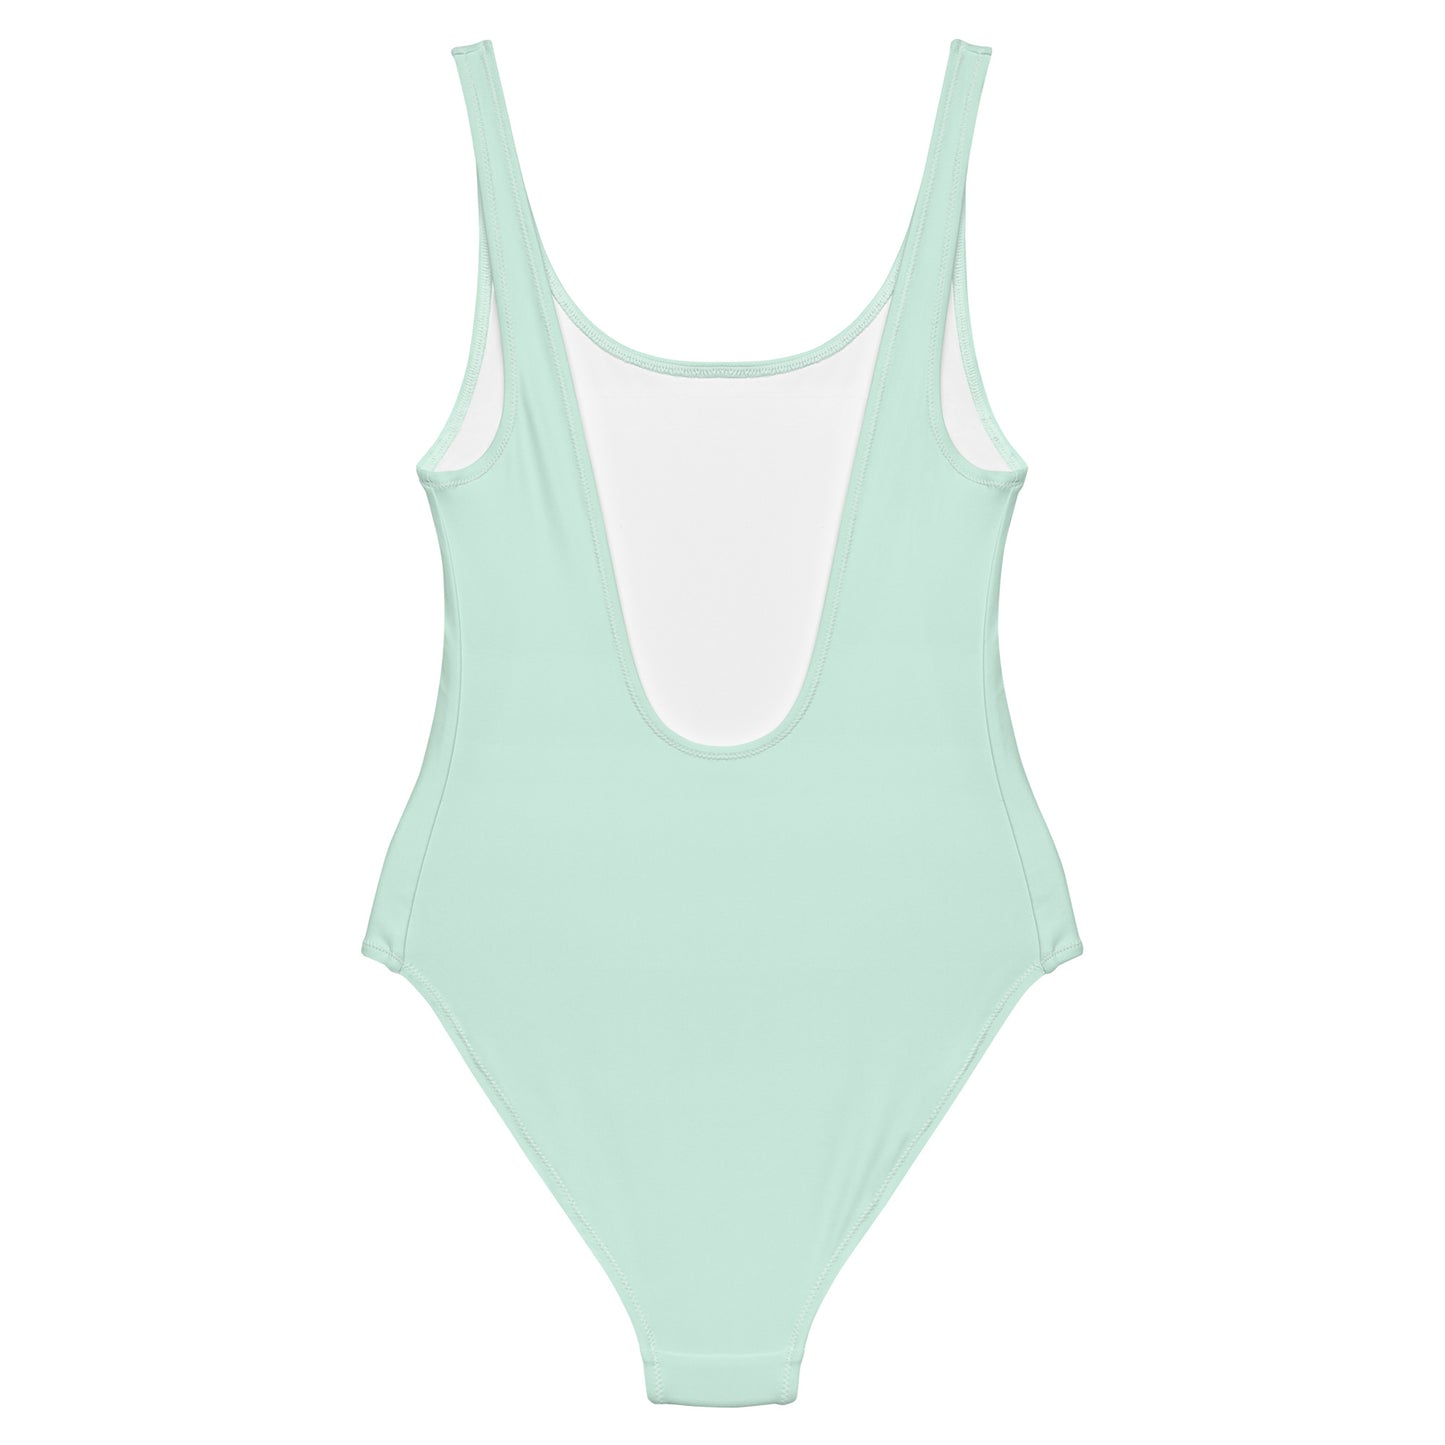 Badlands One-Piece Swimsuit in mint chip